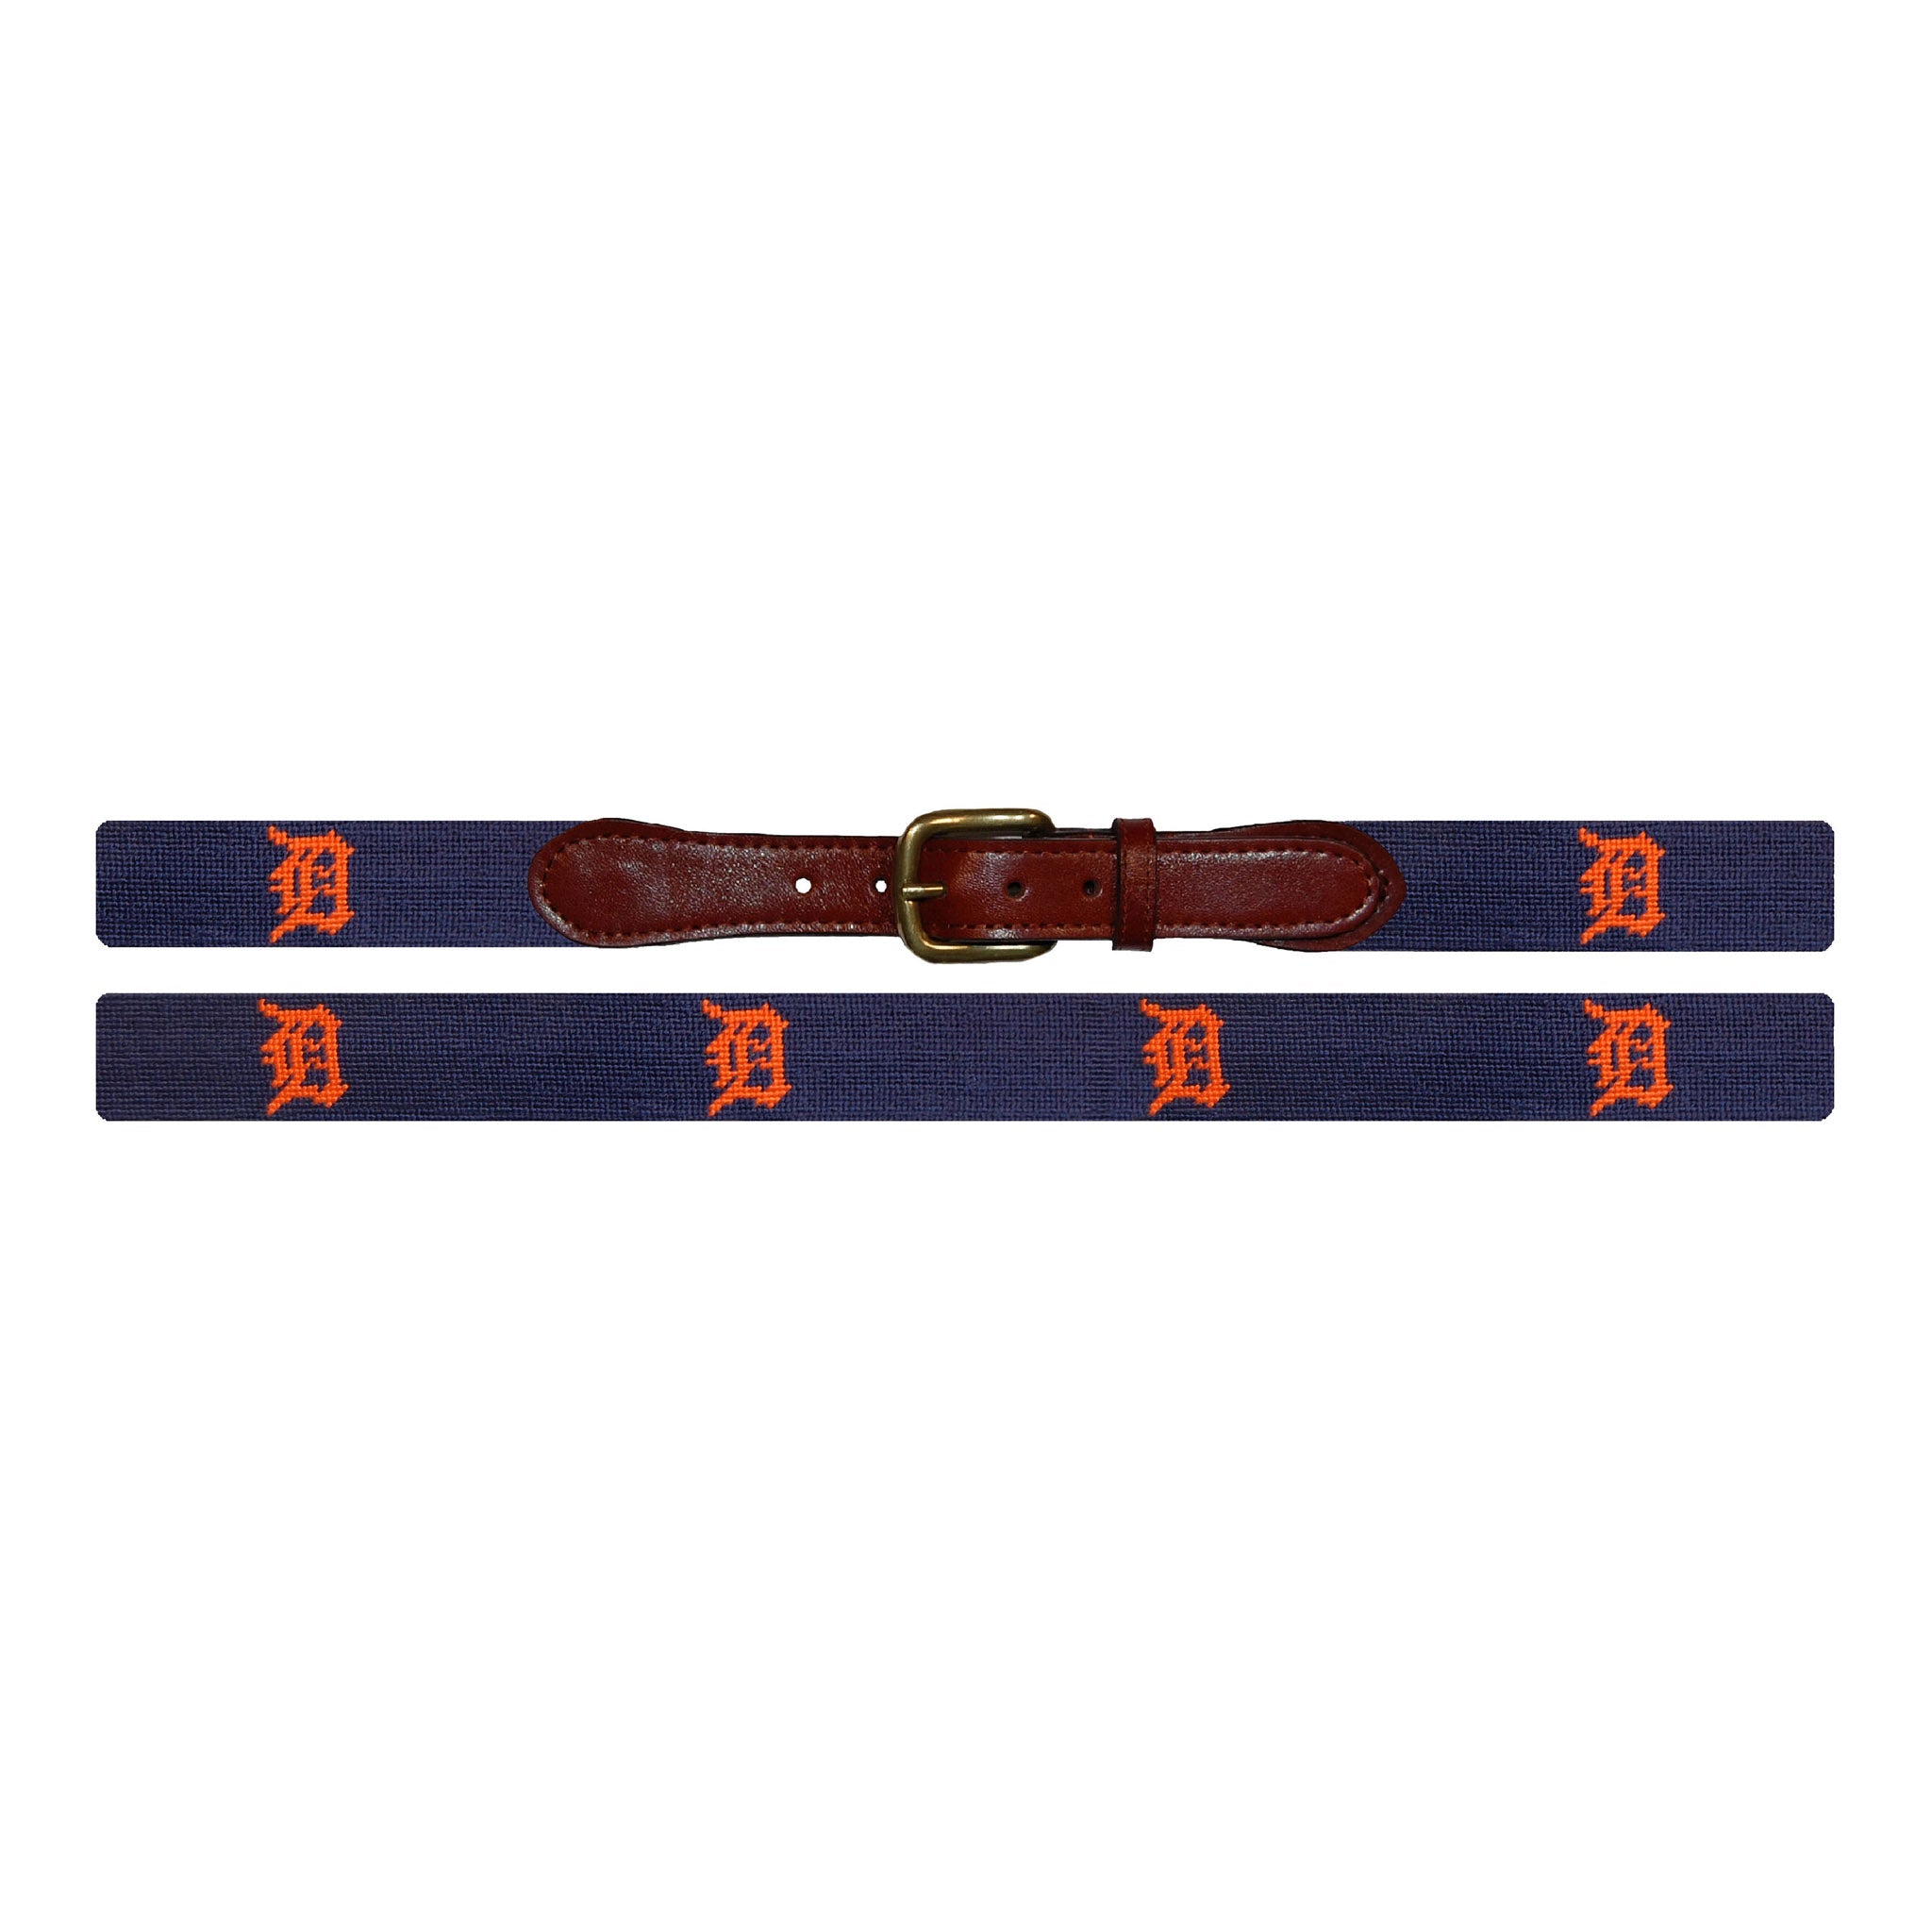 Smathers and Branson Detroit Tigers Needlepoint Belt Laid Out 